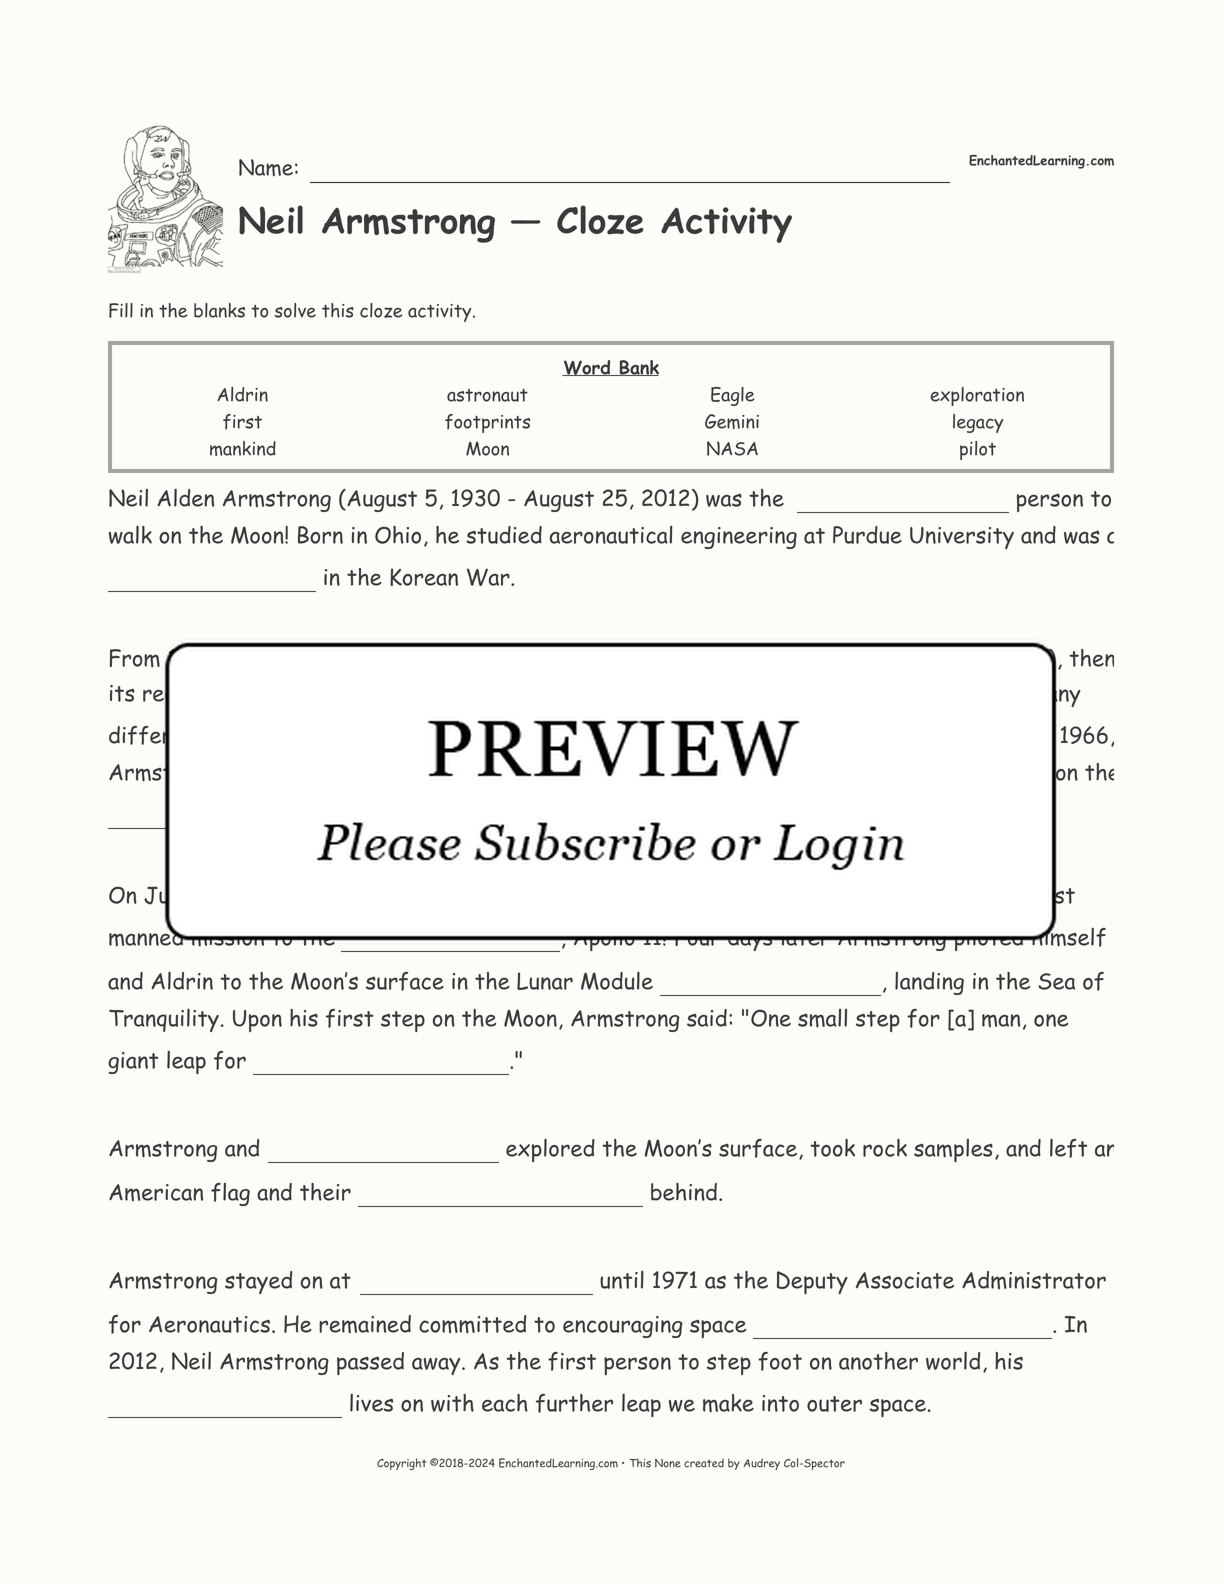 Neil Armstrong — Cloze Activity interactive worksheet page 1